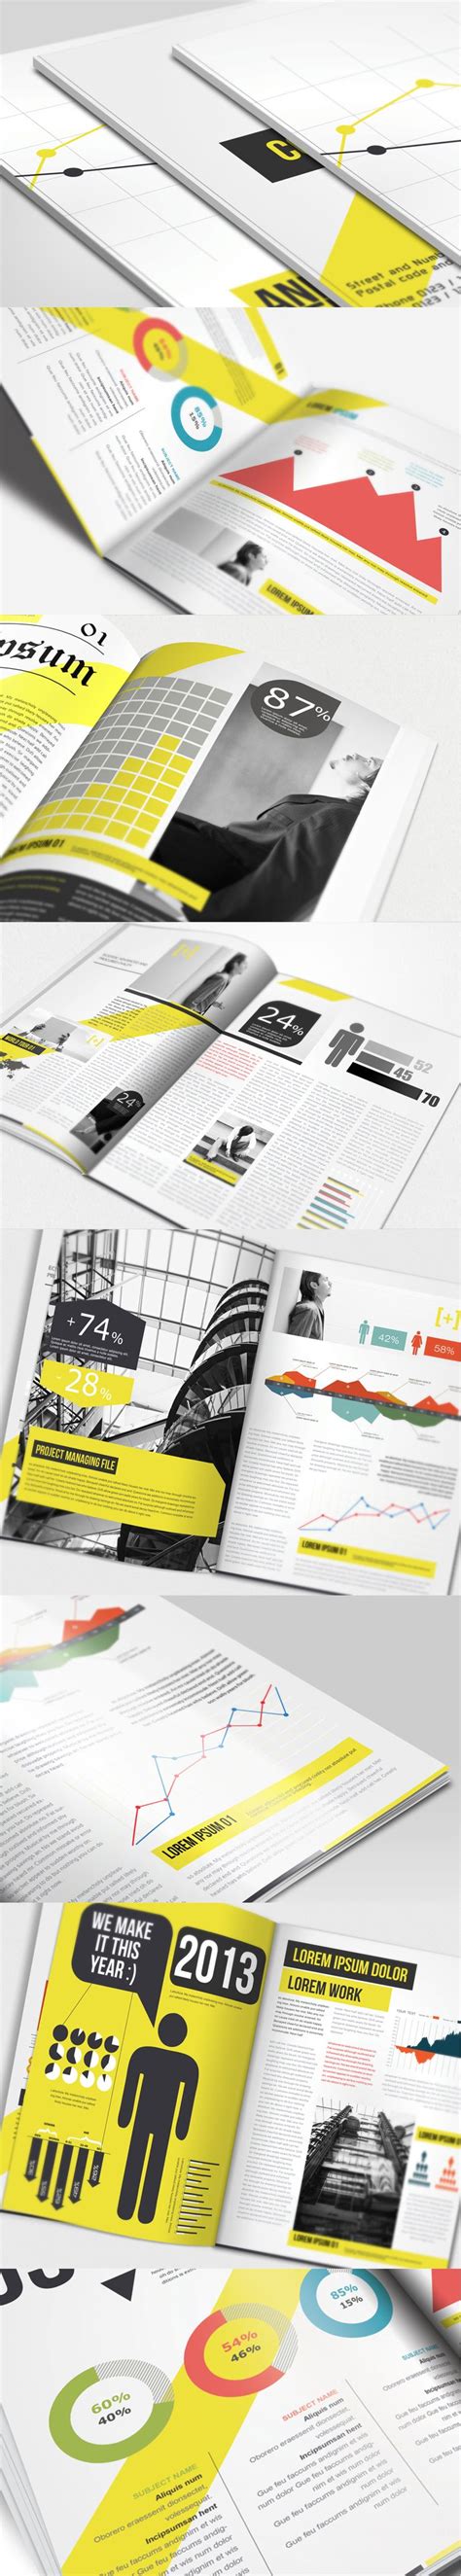 Charts & Graphs - Annual Report Brochure Ver 2.0 by Unicogfx (via ...